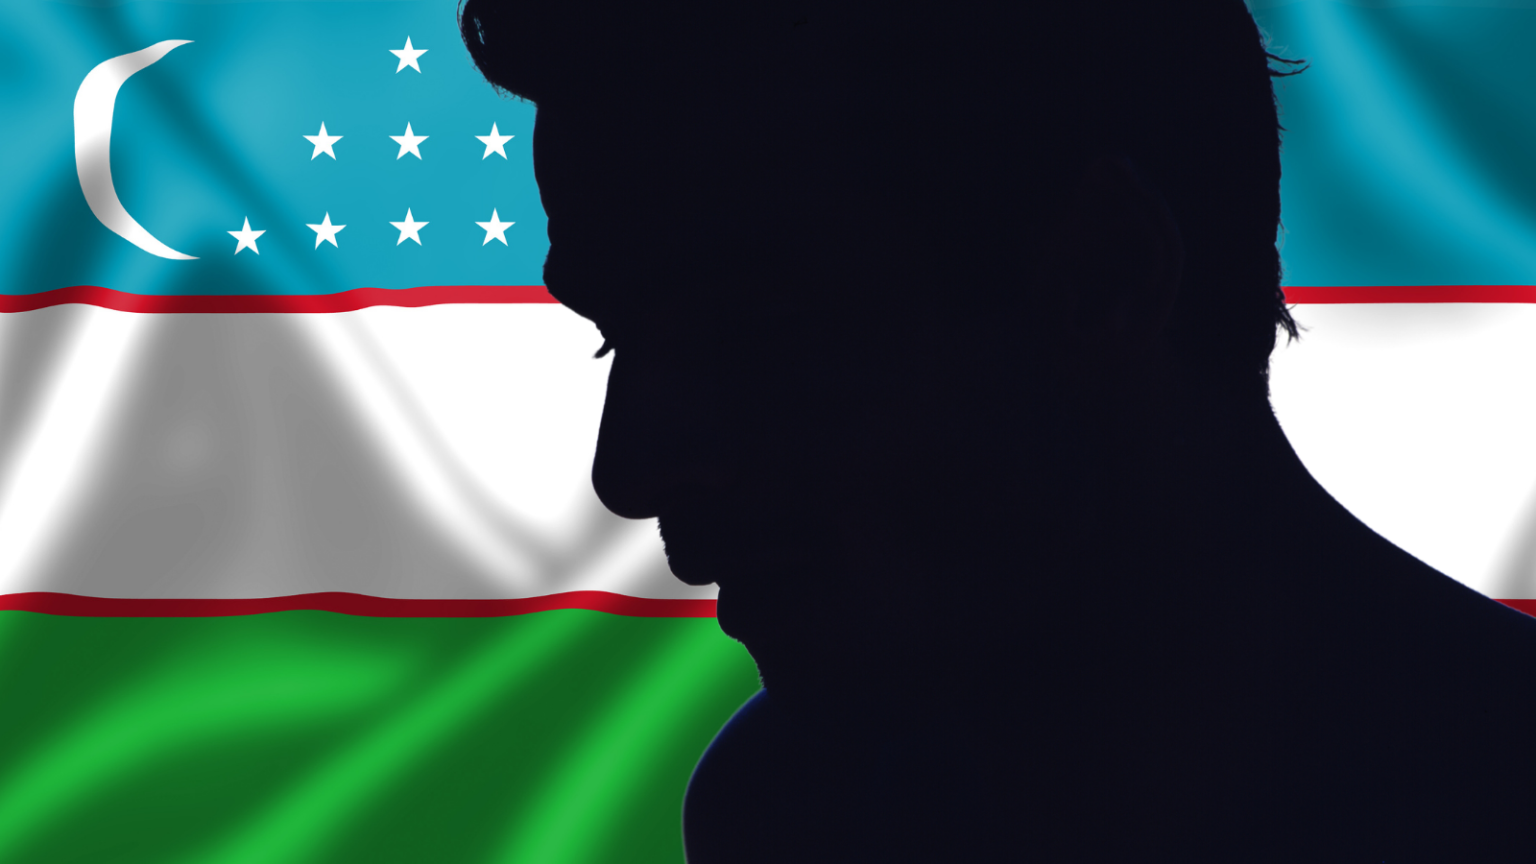 The profile of a man in silhouette against the Uzbek flag